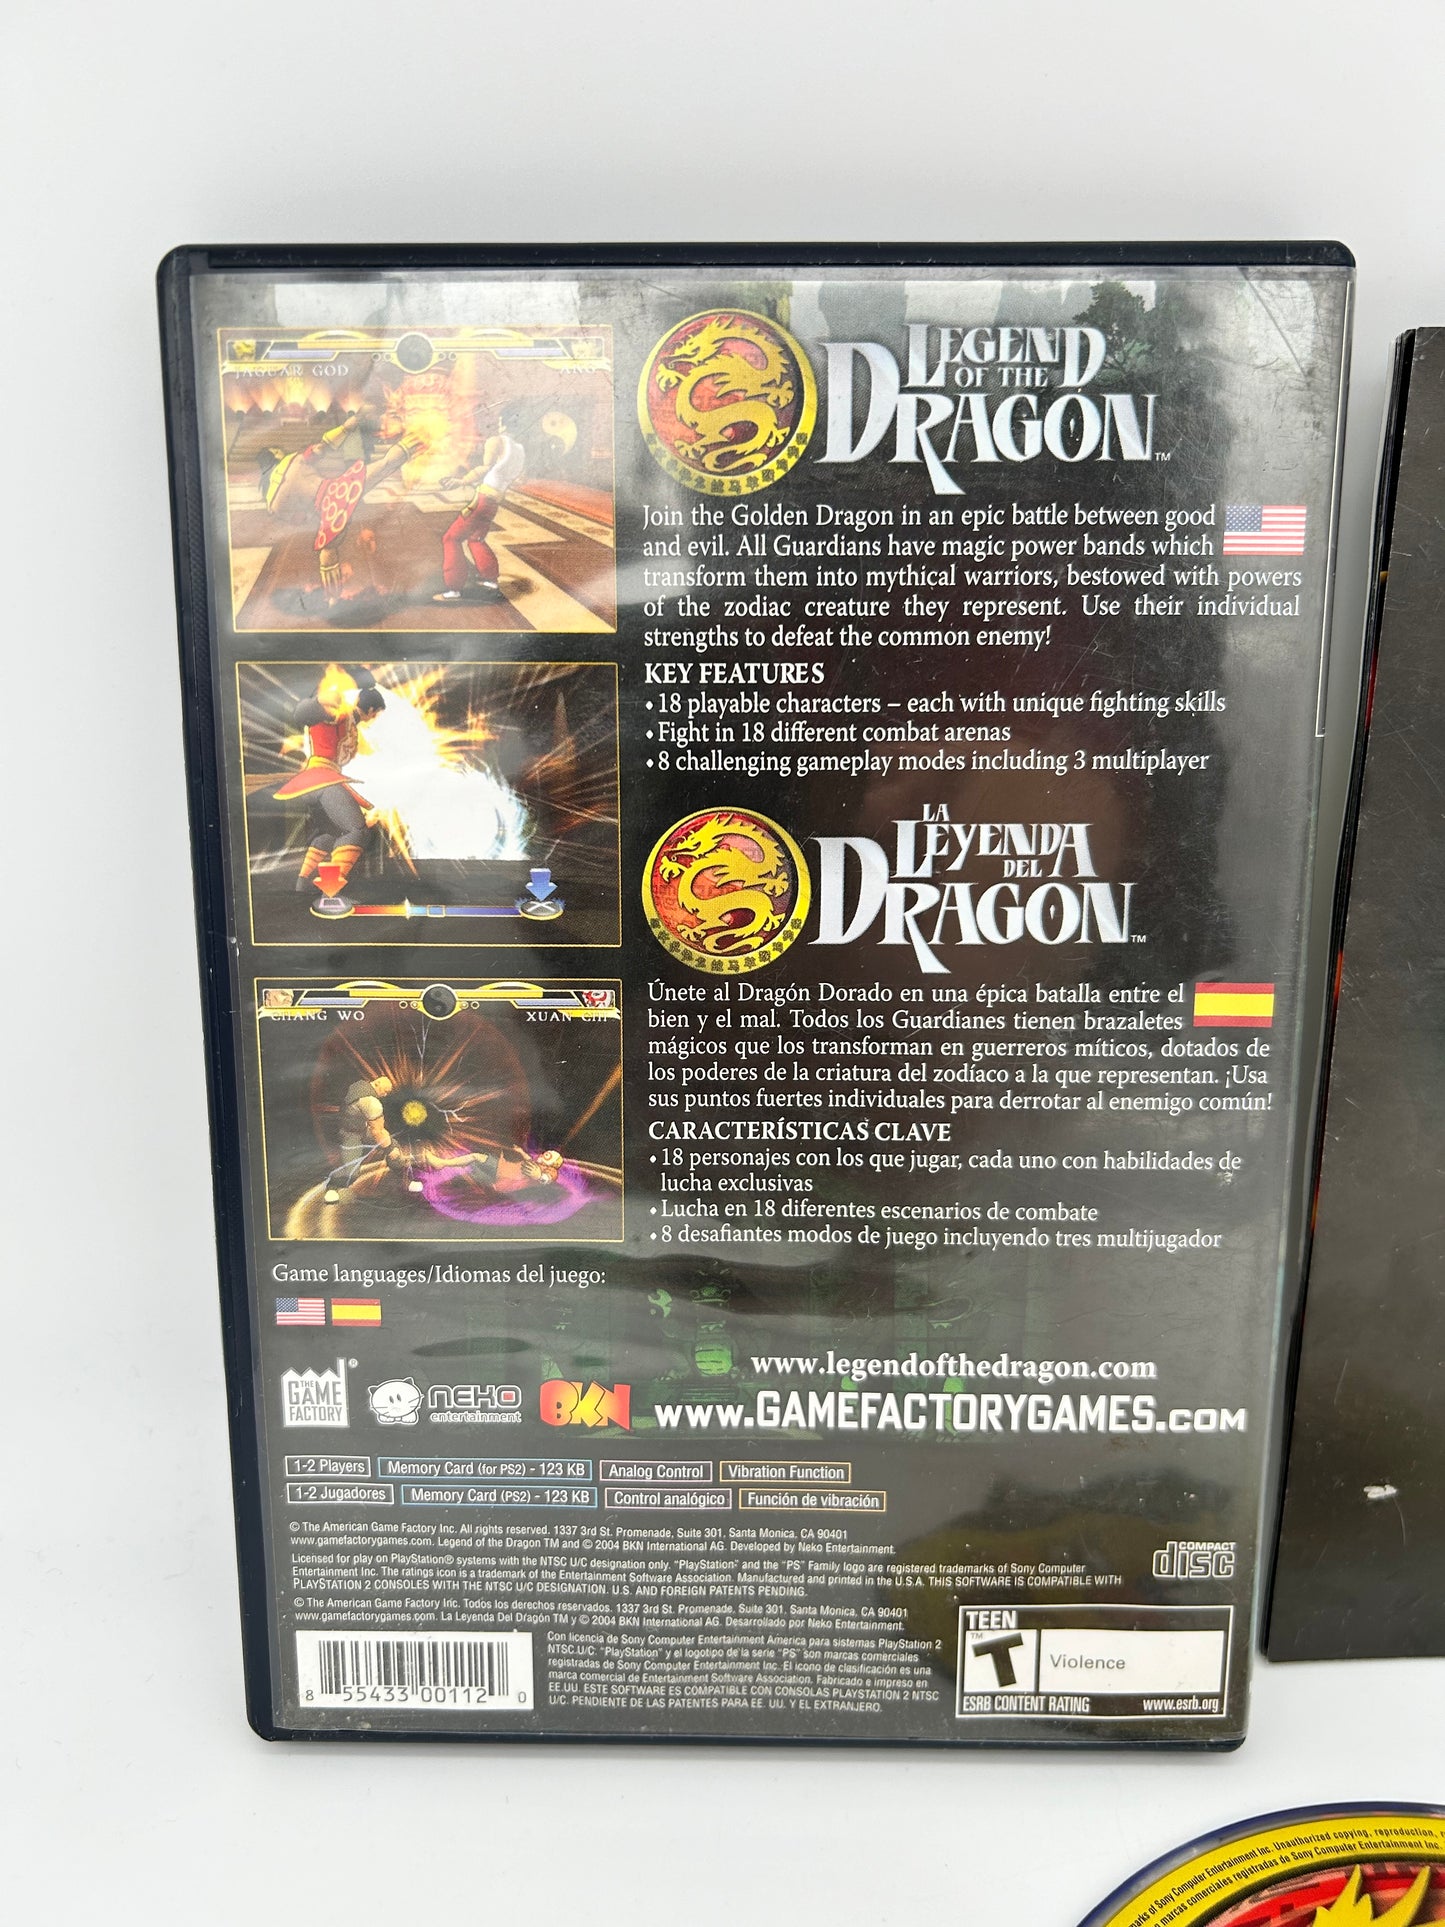 SONY PLAYSTATiON 2 [PS2] | LEGEND OF THE DRAGON